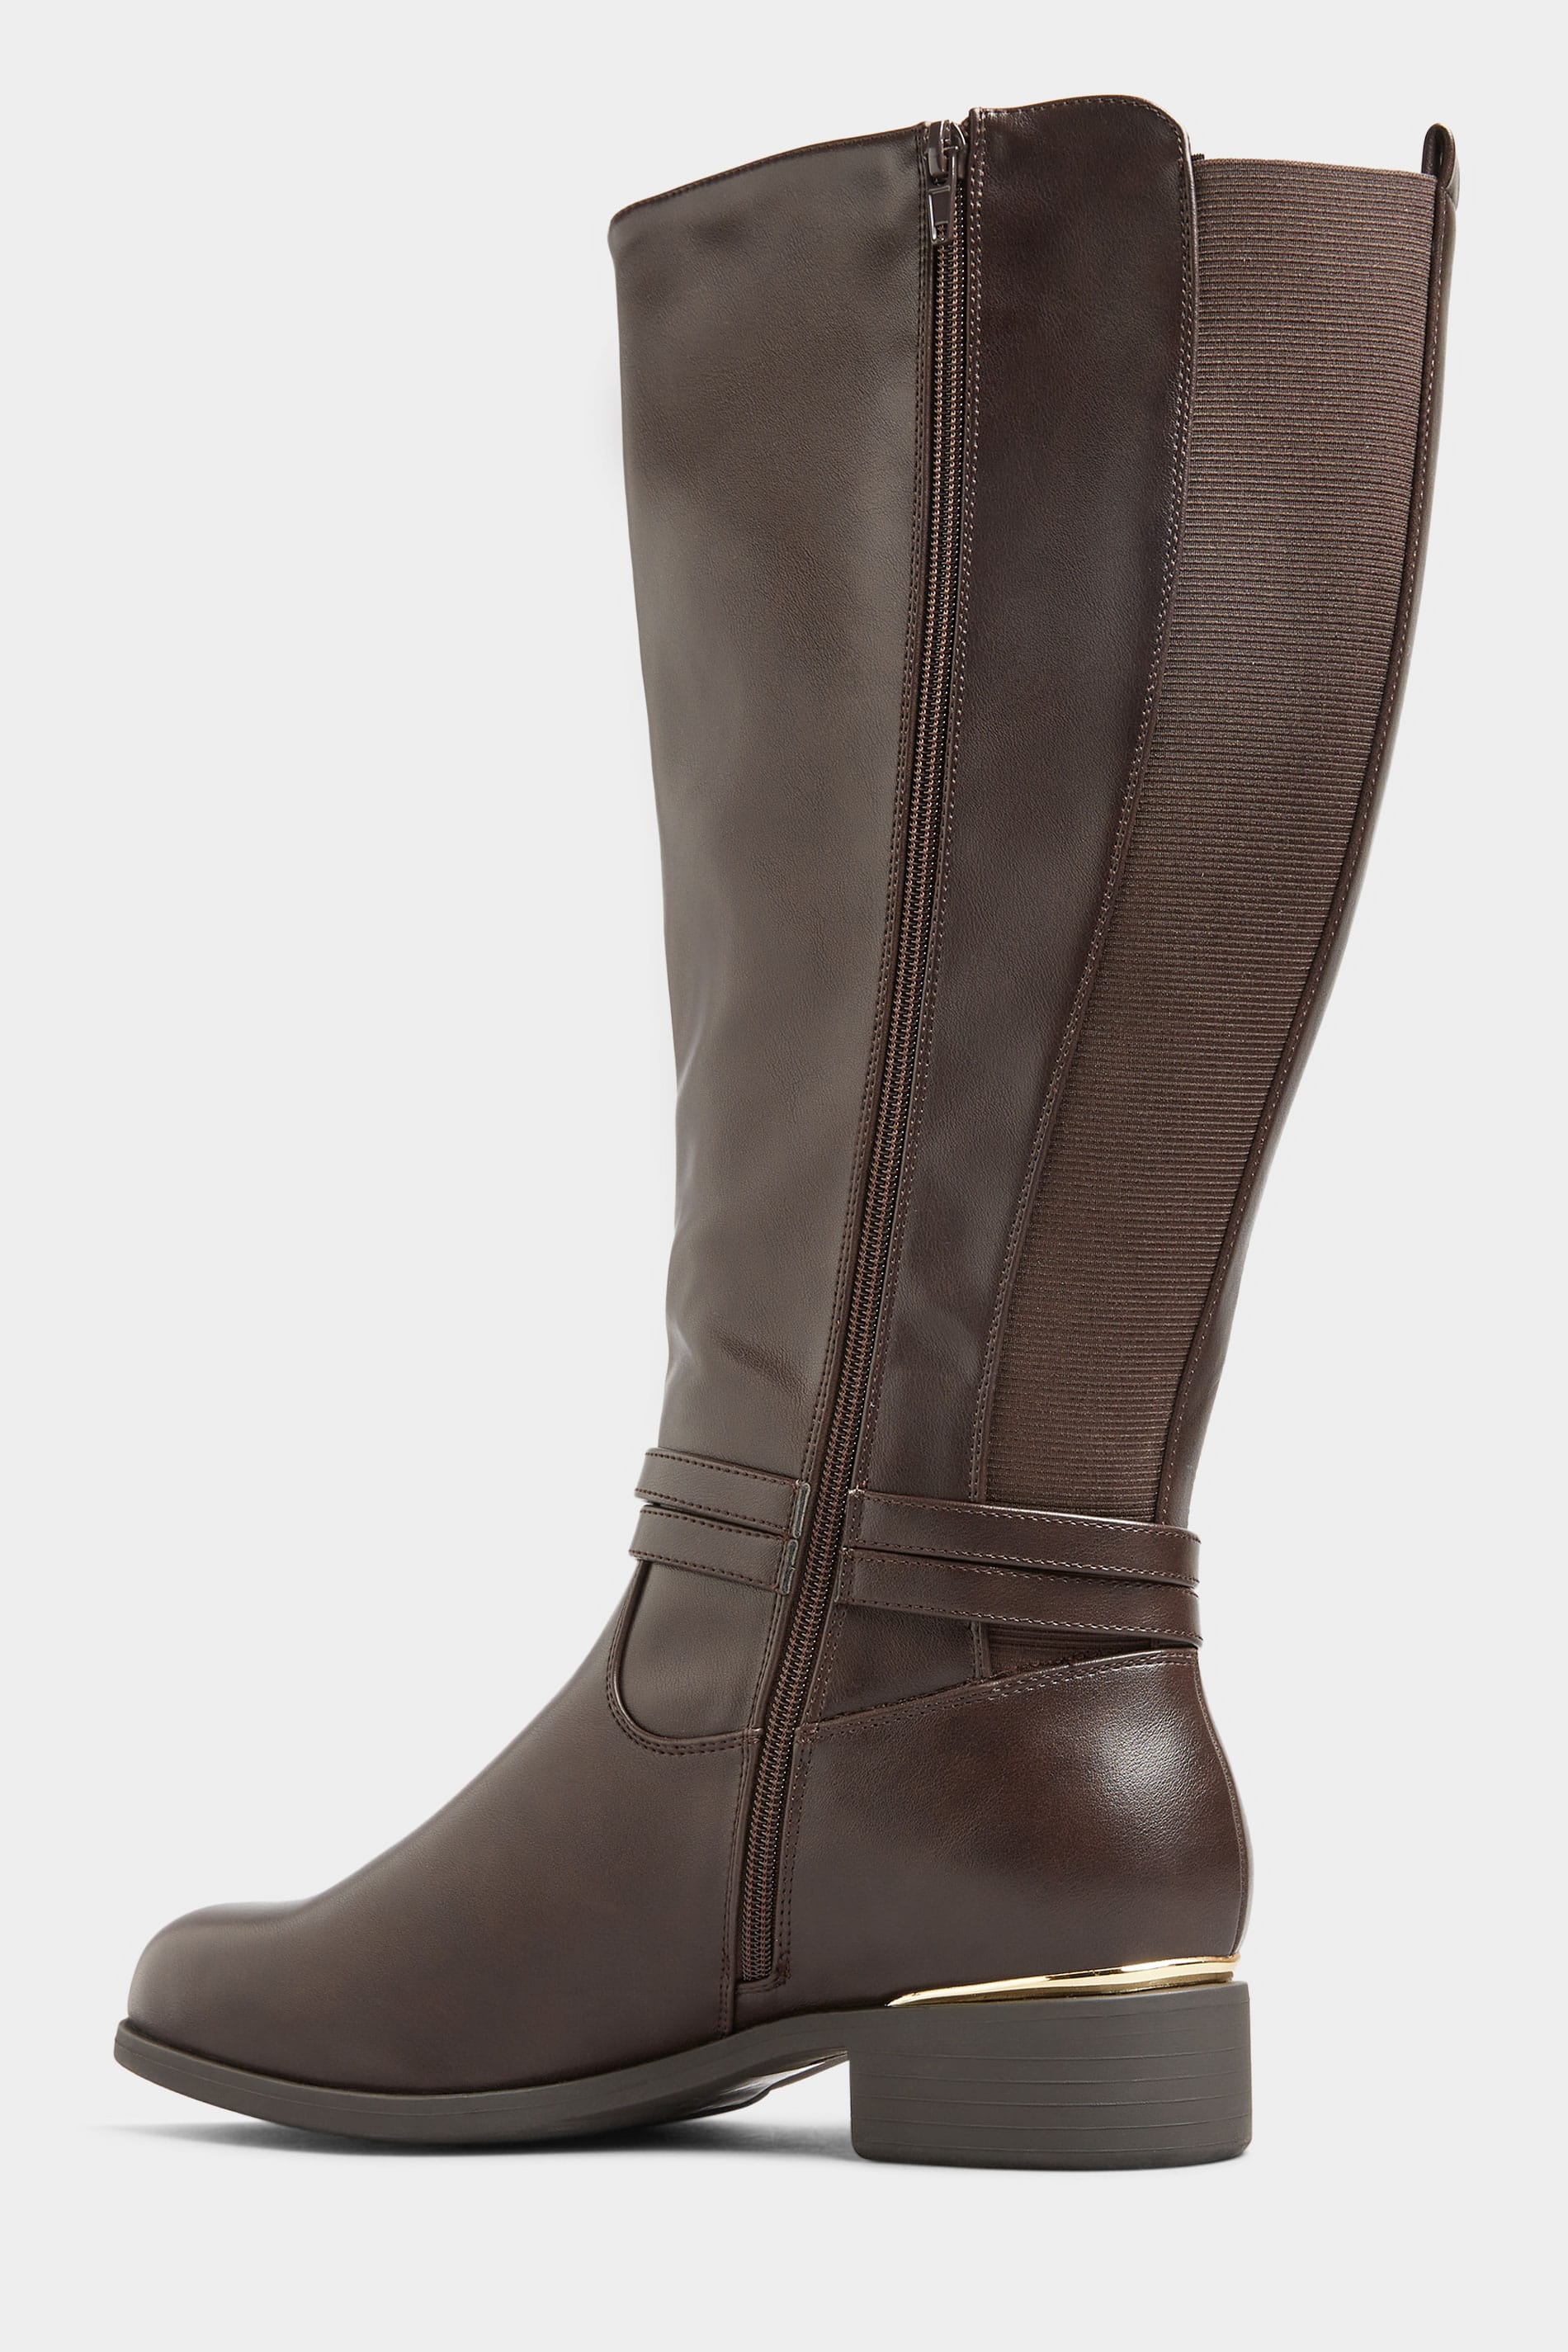 Brown Vegan Faux Leather Wrap Trim Knee High Boots In Extra Wide Fit Yours Clothing